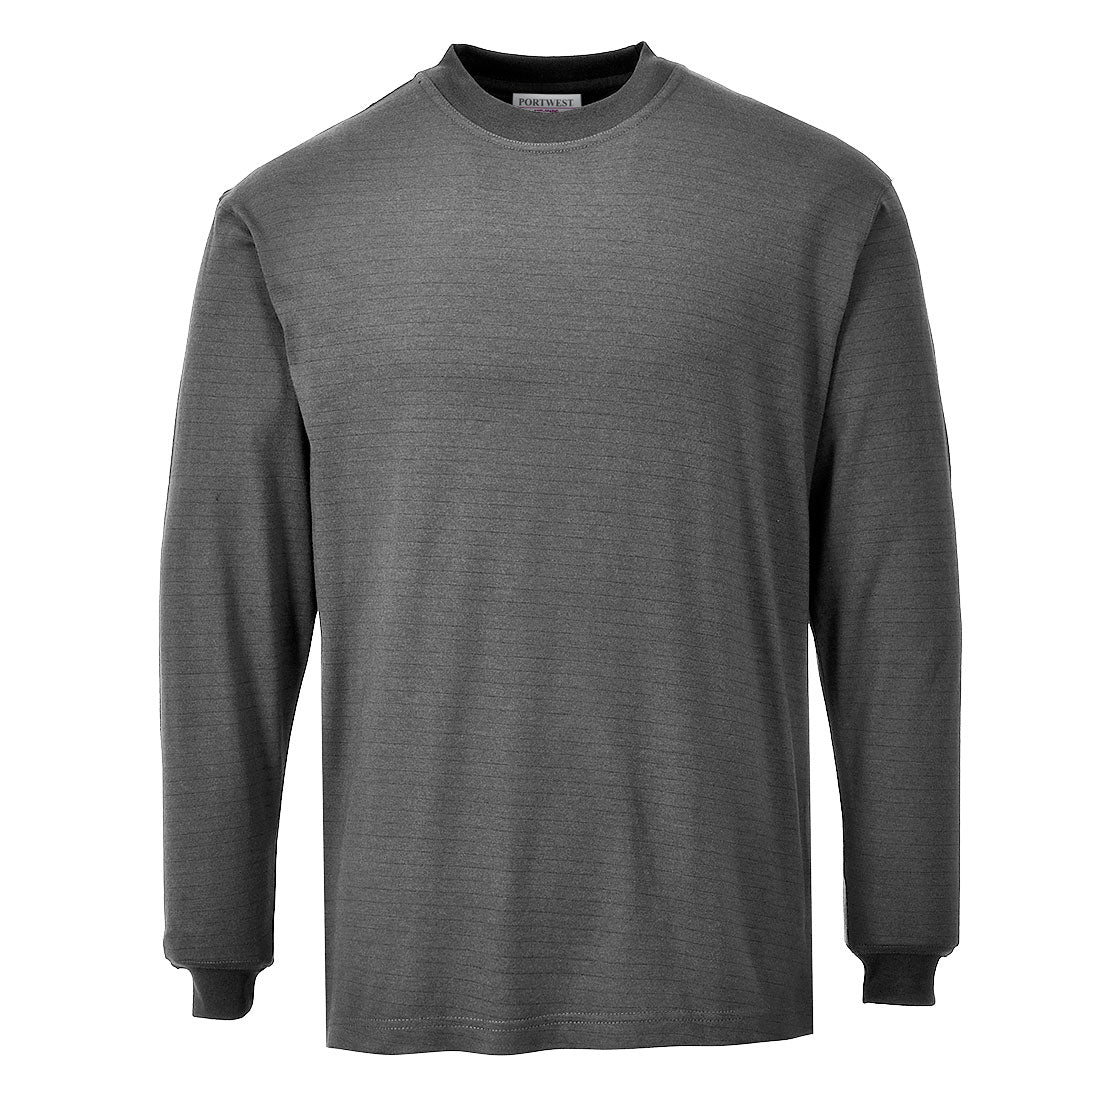 Flame Resistant Anti-Static Long Sleeve T-Shirt - arbeitskleidung-gmbh